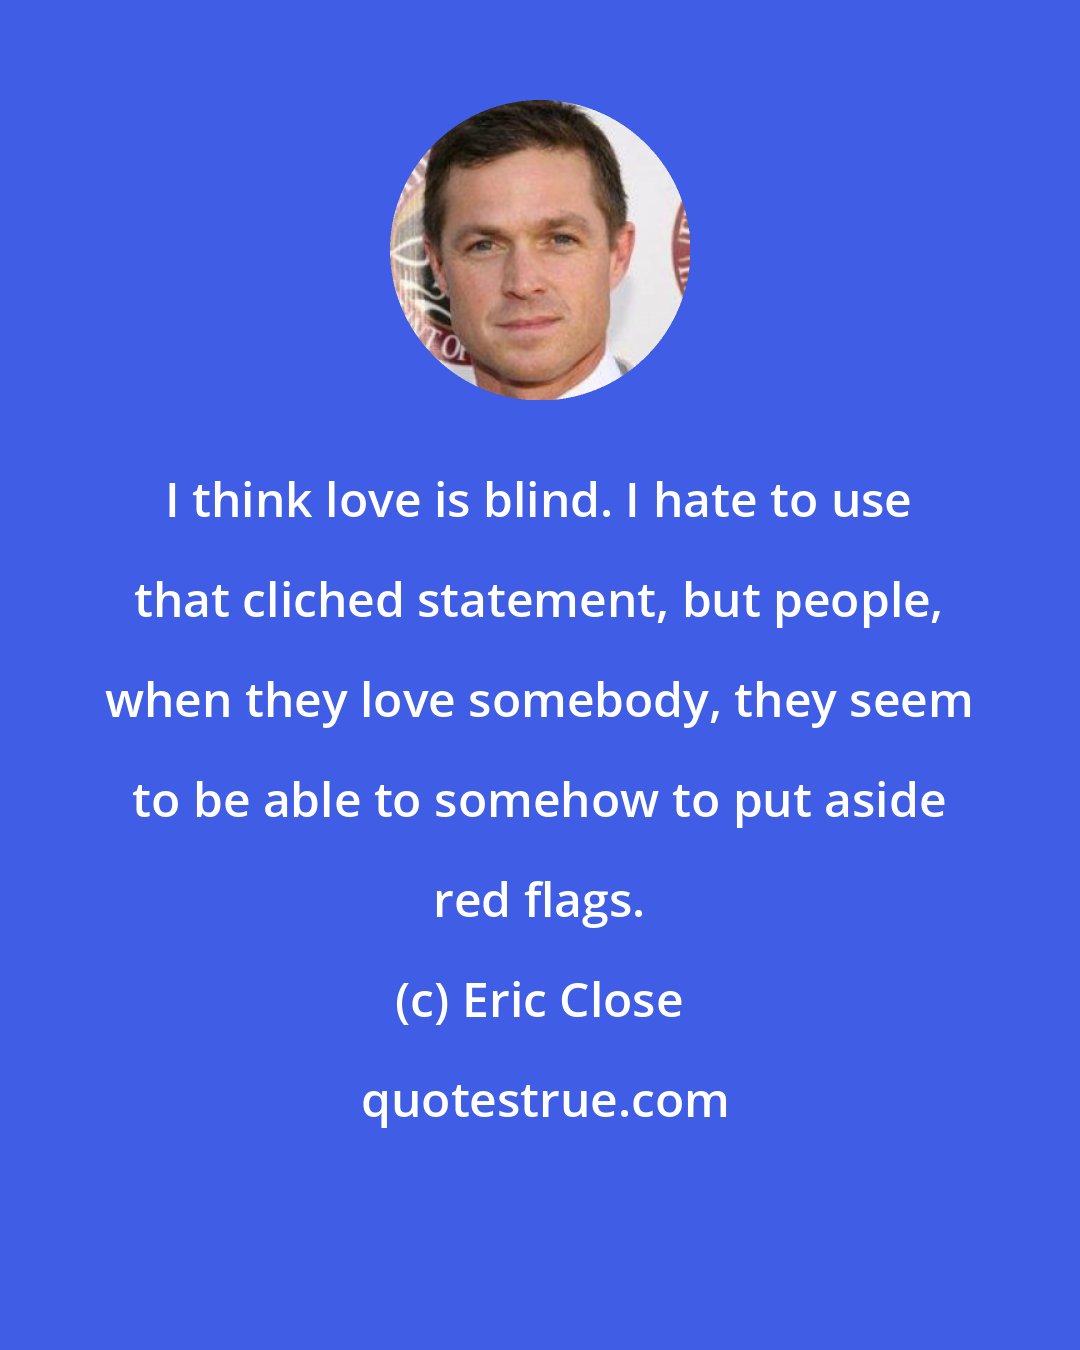 Eric Close: I think love is blind. I hate to use that cliched statement, but people, when they love somebody, they seem to be able to somehow to put aside red flags.